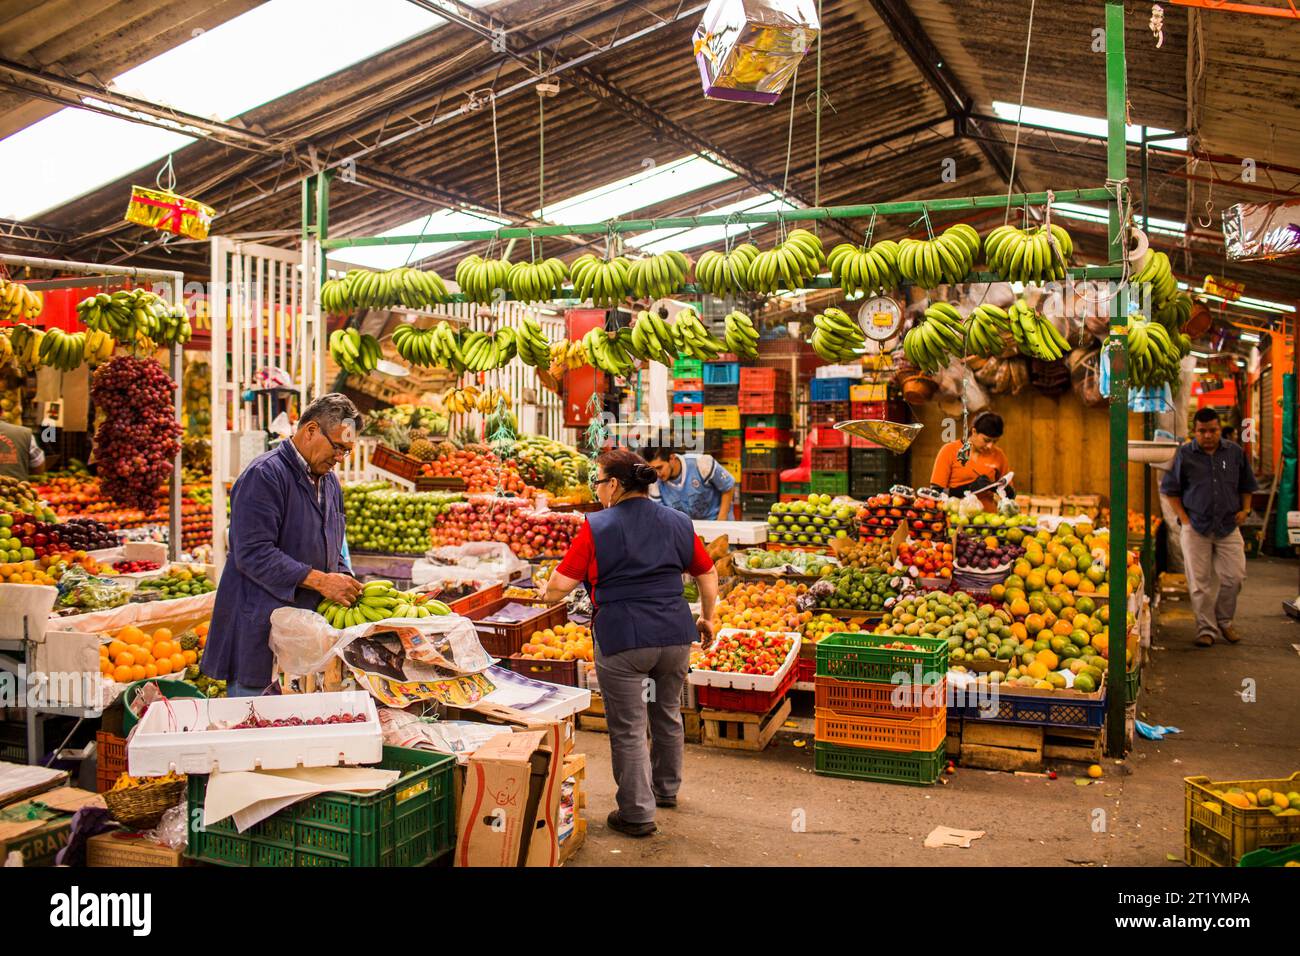 Venders at the Plaza de Mercado deÂ Paloquemao in Bogota, Colombia sell everything from fruits and vegetables to fish to chickens. Stock Photo